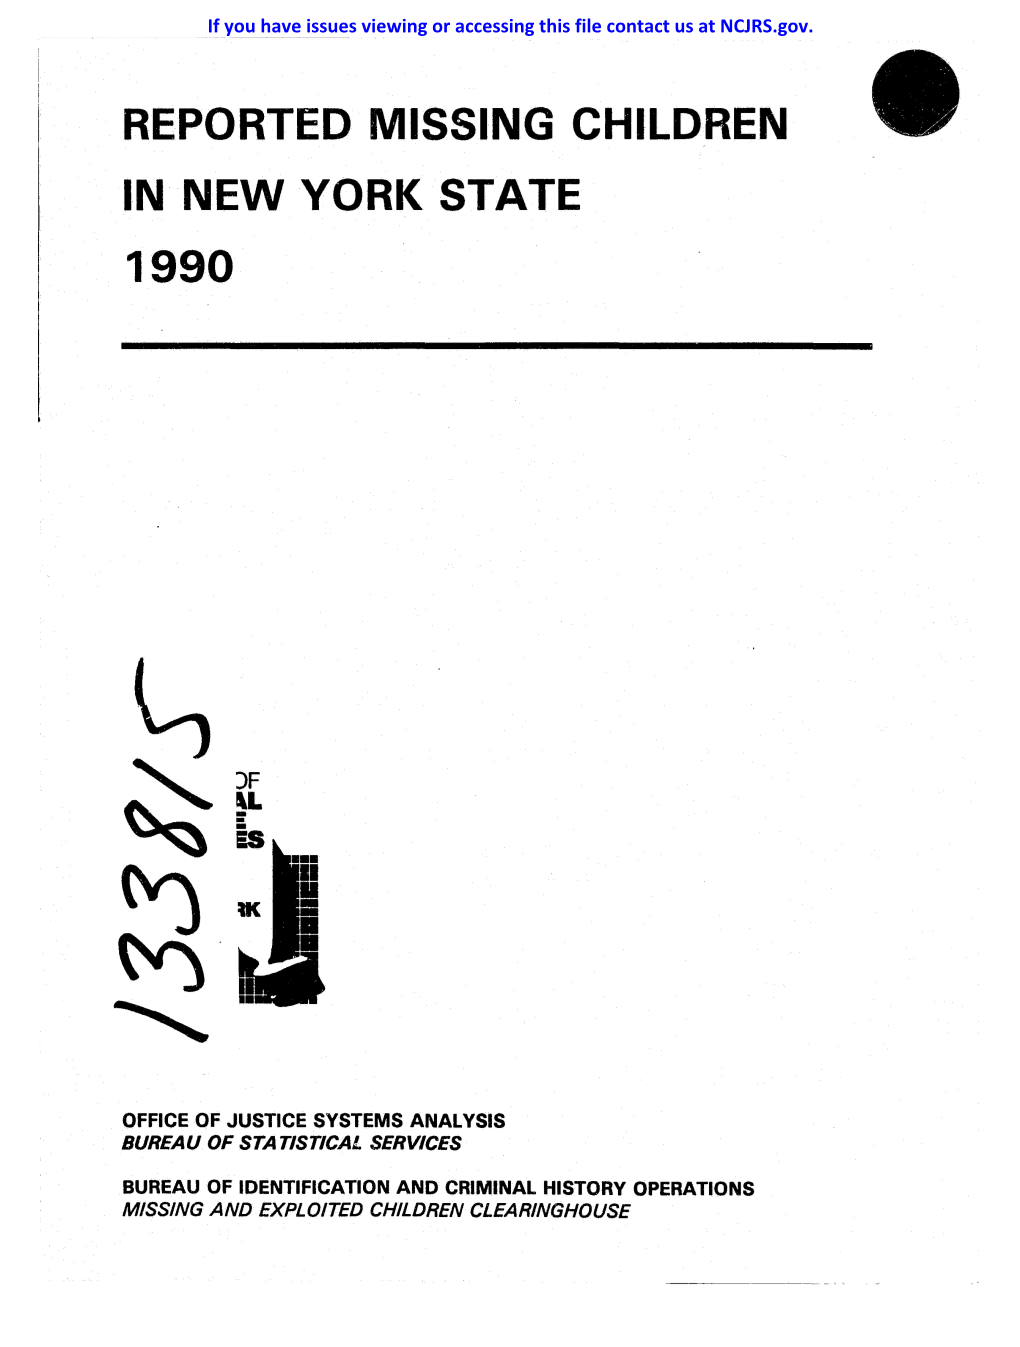 Reported Missing Children in New York State 1990